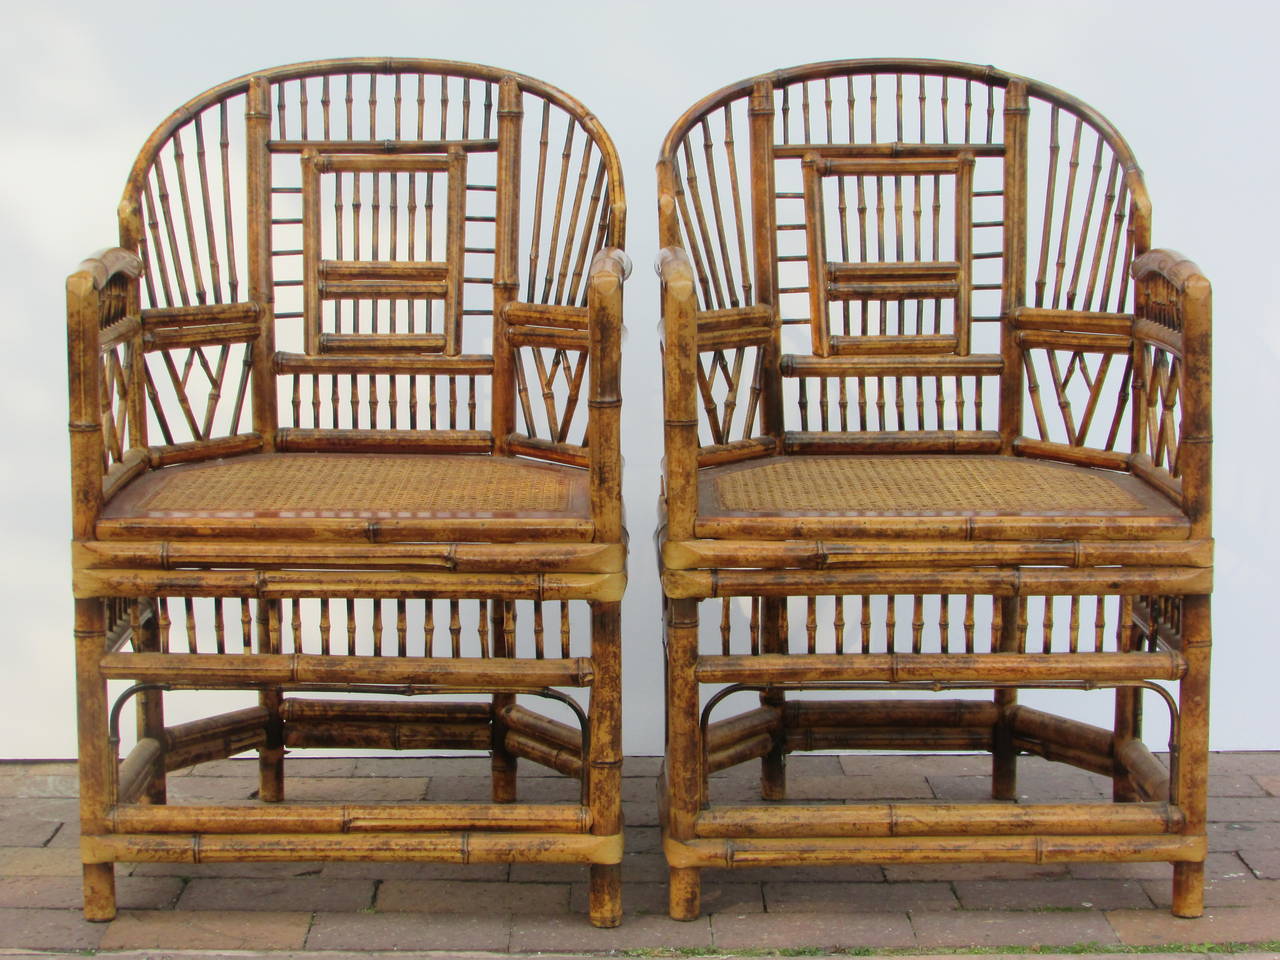 A pair of Brighton Pavillion Chinese Chippendale style burnt bamboo rattan armchairs with wood and pressed cane seats. Both chairs in beautifully aged all over original glowing tortoise shell like color.